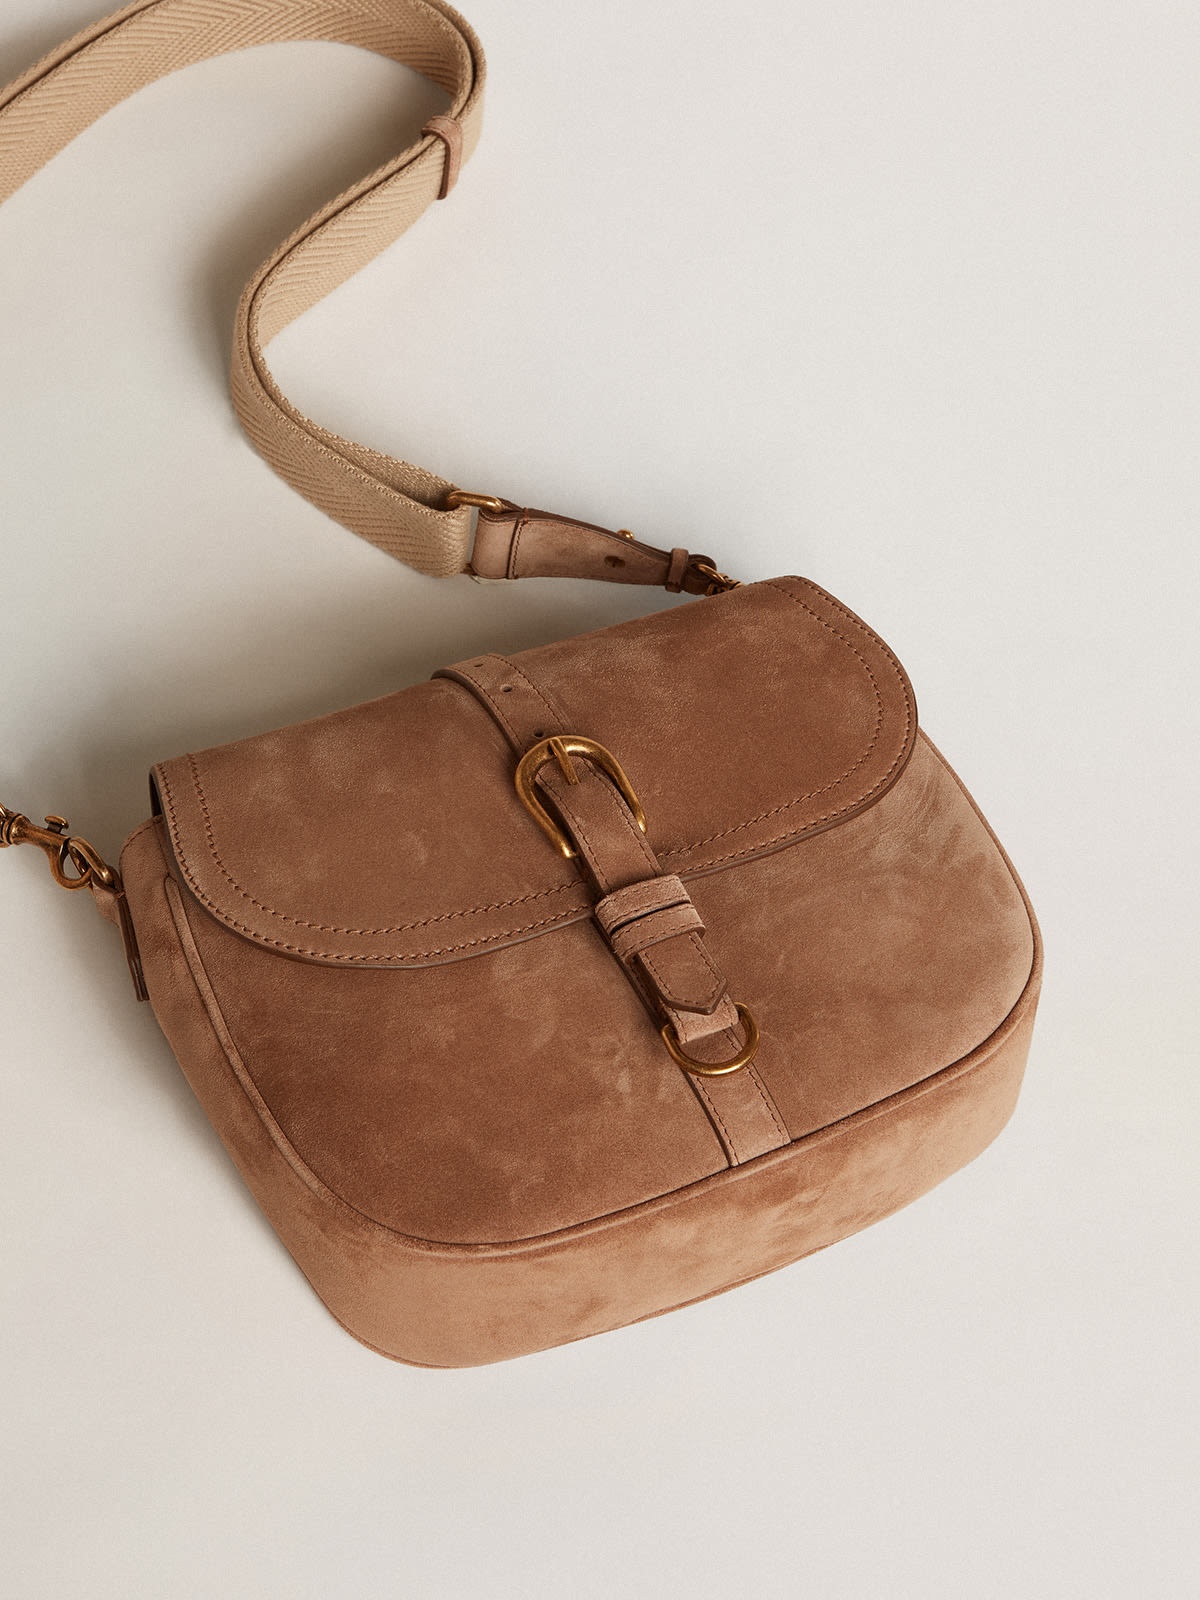 Medium Sally Bag in ash-colored suede with contrasting buckle and shoulder strap - 5